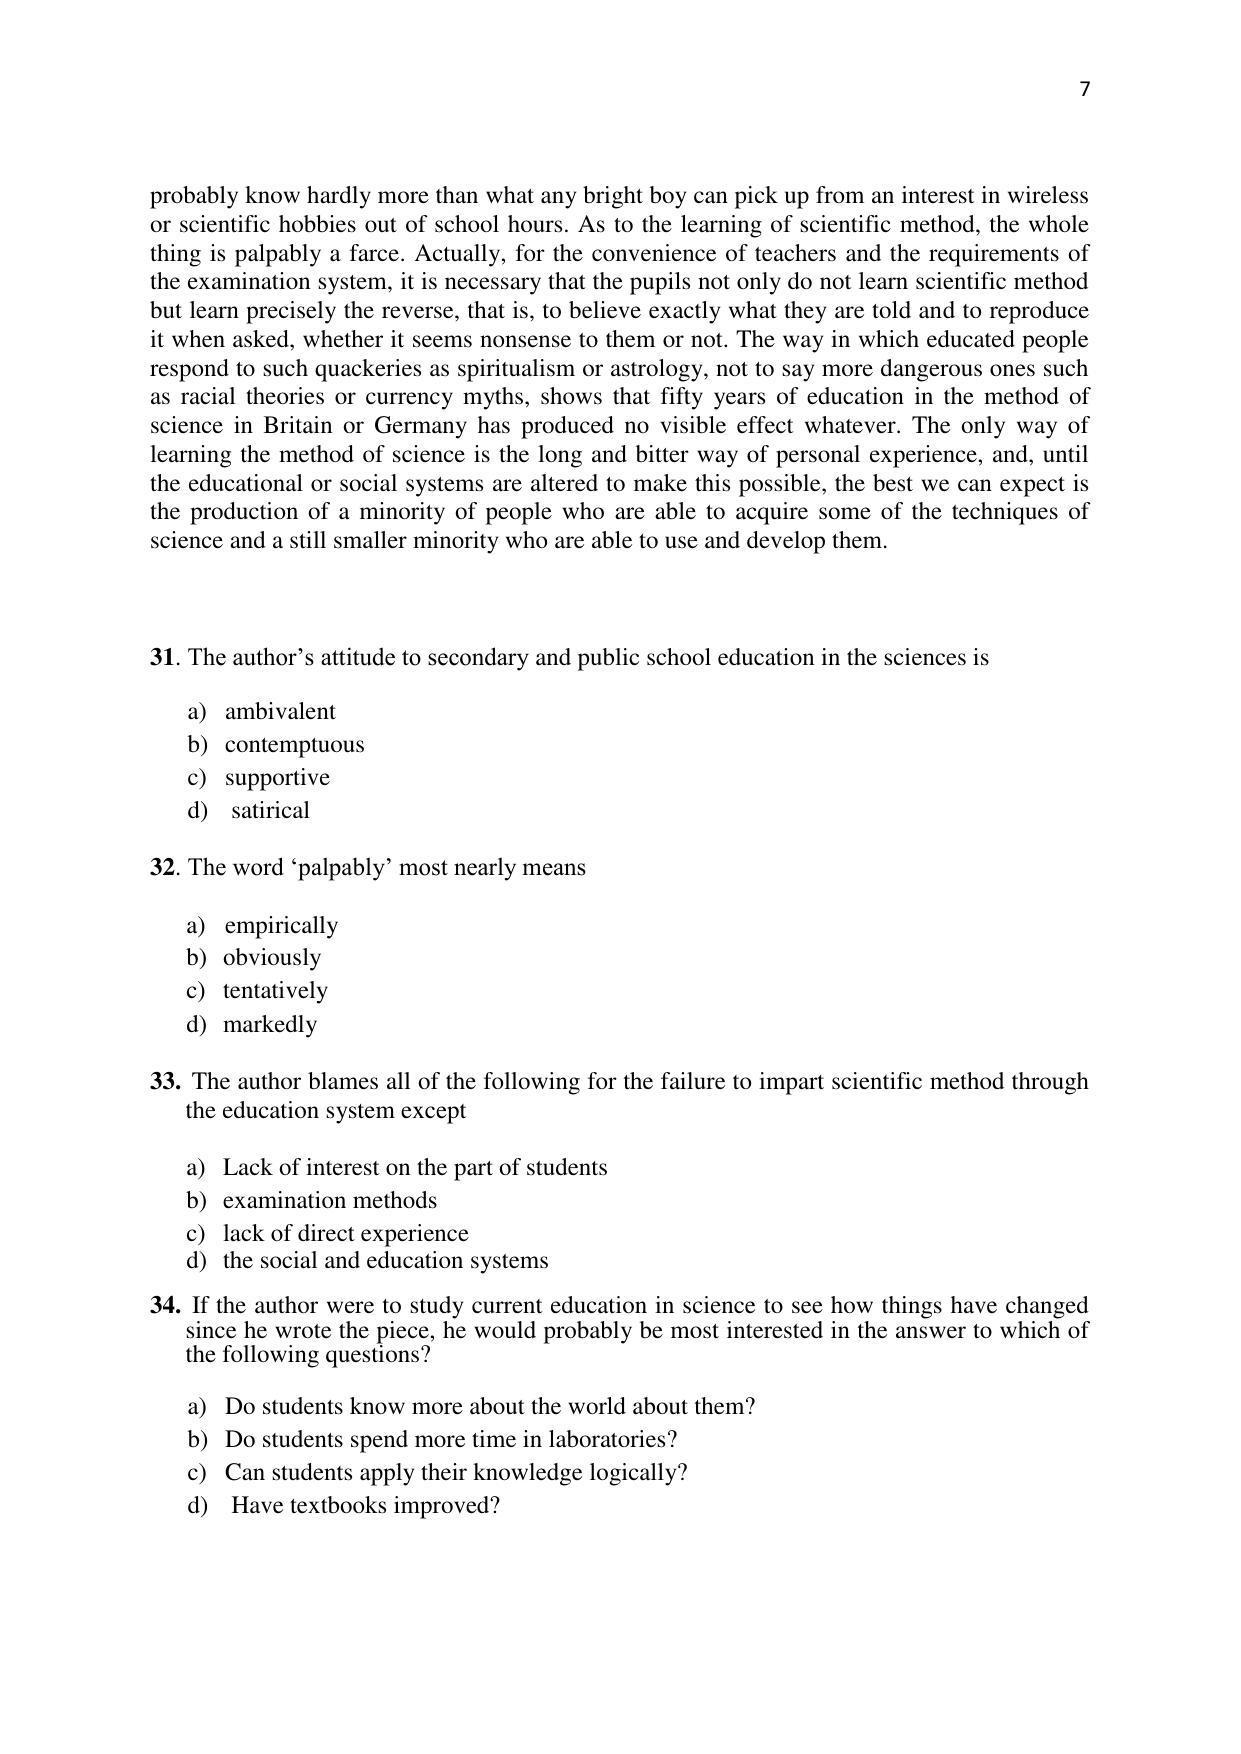 KMAT Question Papers - November 2016 - Page 7